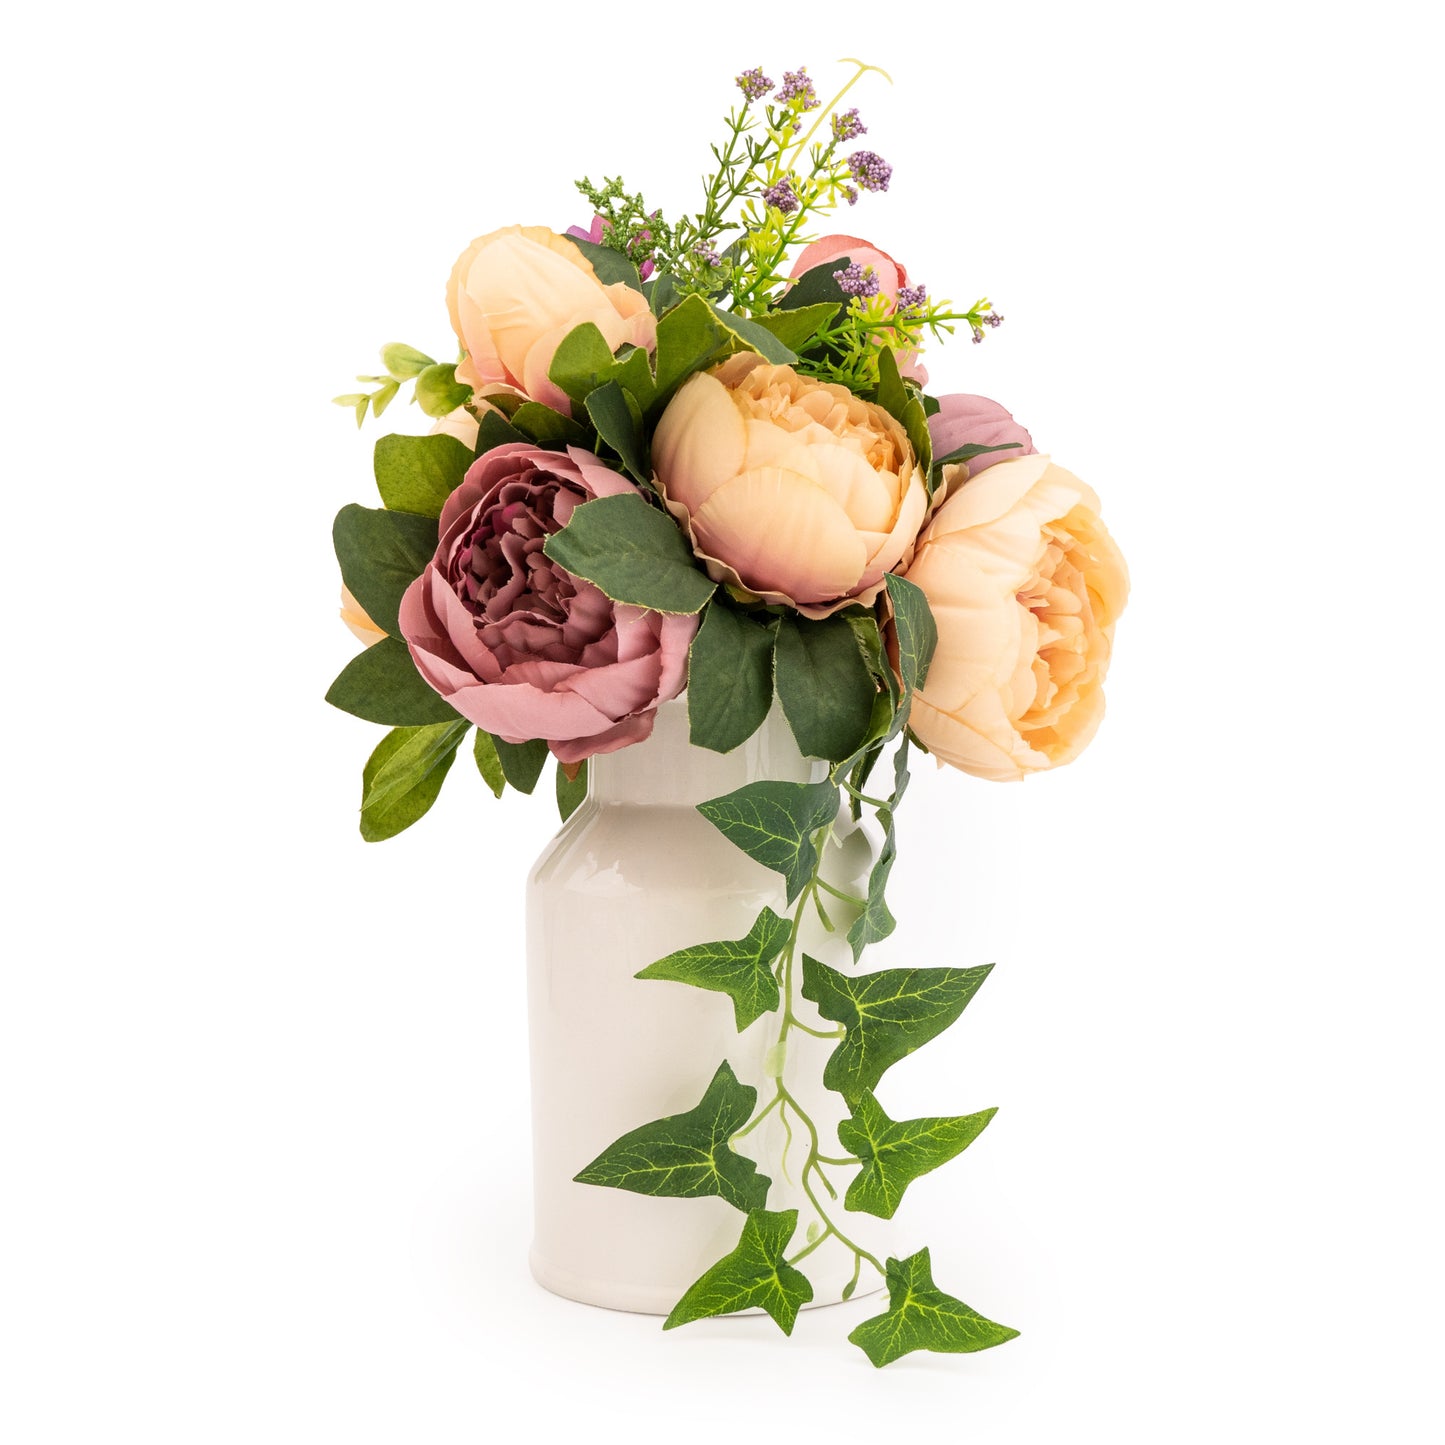 Faux Peonies And Green Ferns In White Vase